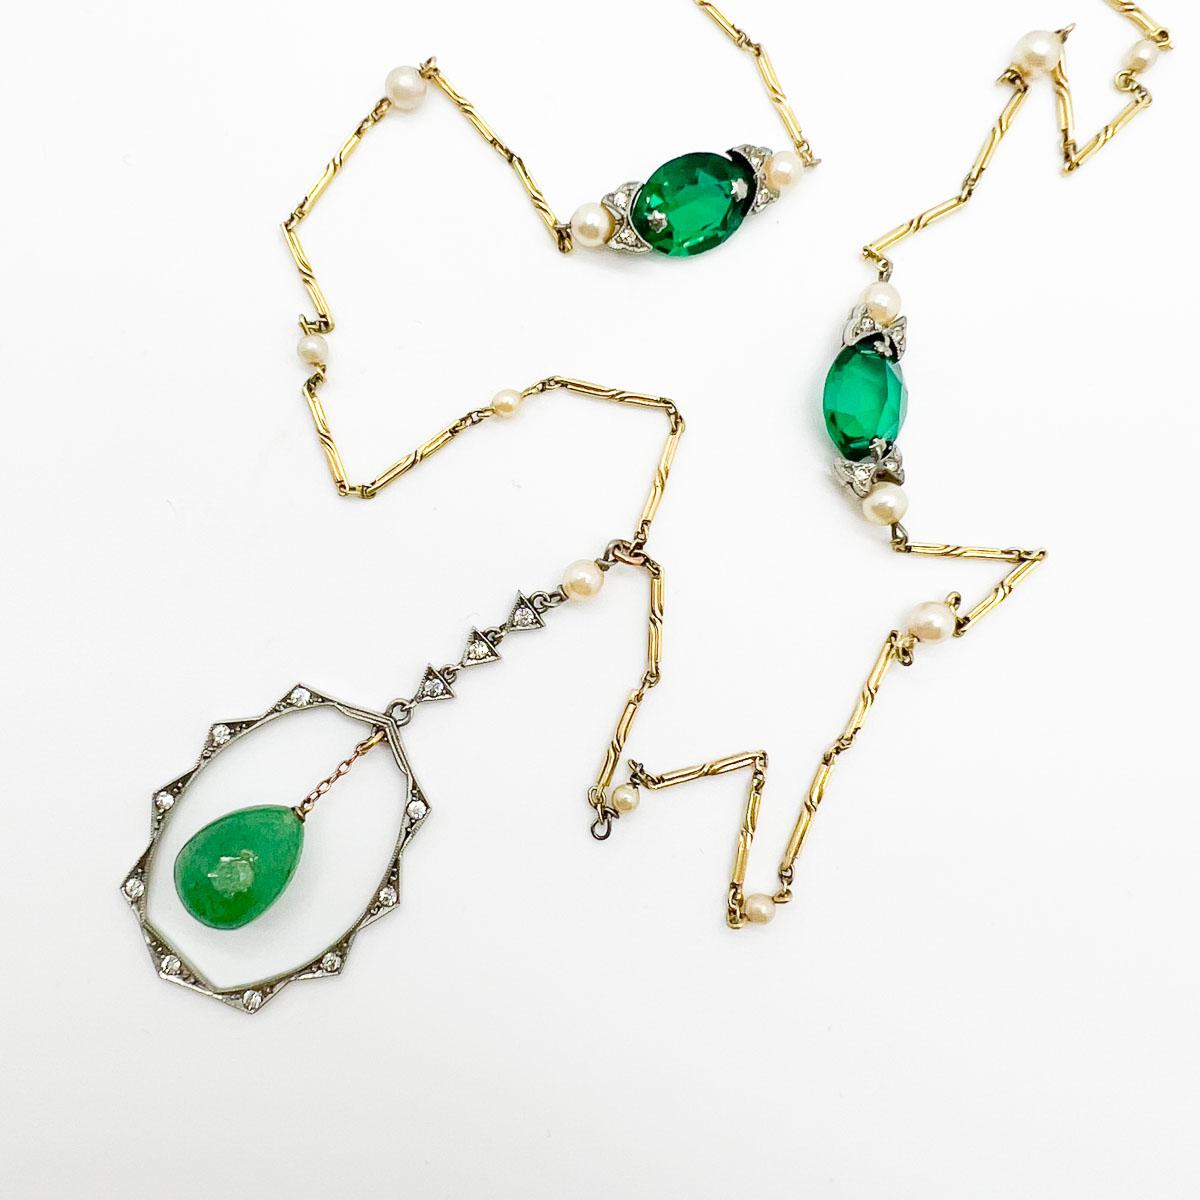 A sublime Antique Art Deco Pearl Lariat dating to the 1920s and the flapper era. A fancy bar link chain embellished with pearls sets the scene. Emerald paste adorns the chain in white settings in step with the white metal pendant within which a